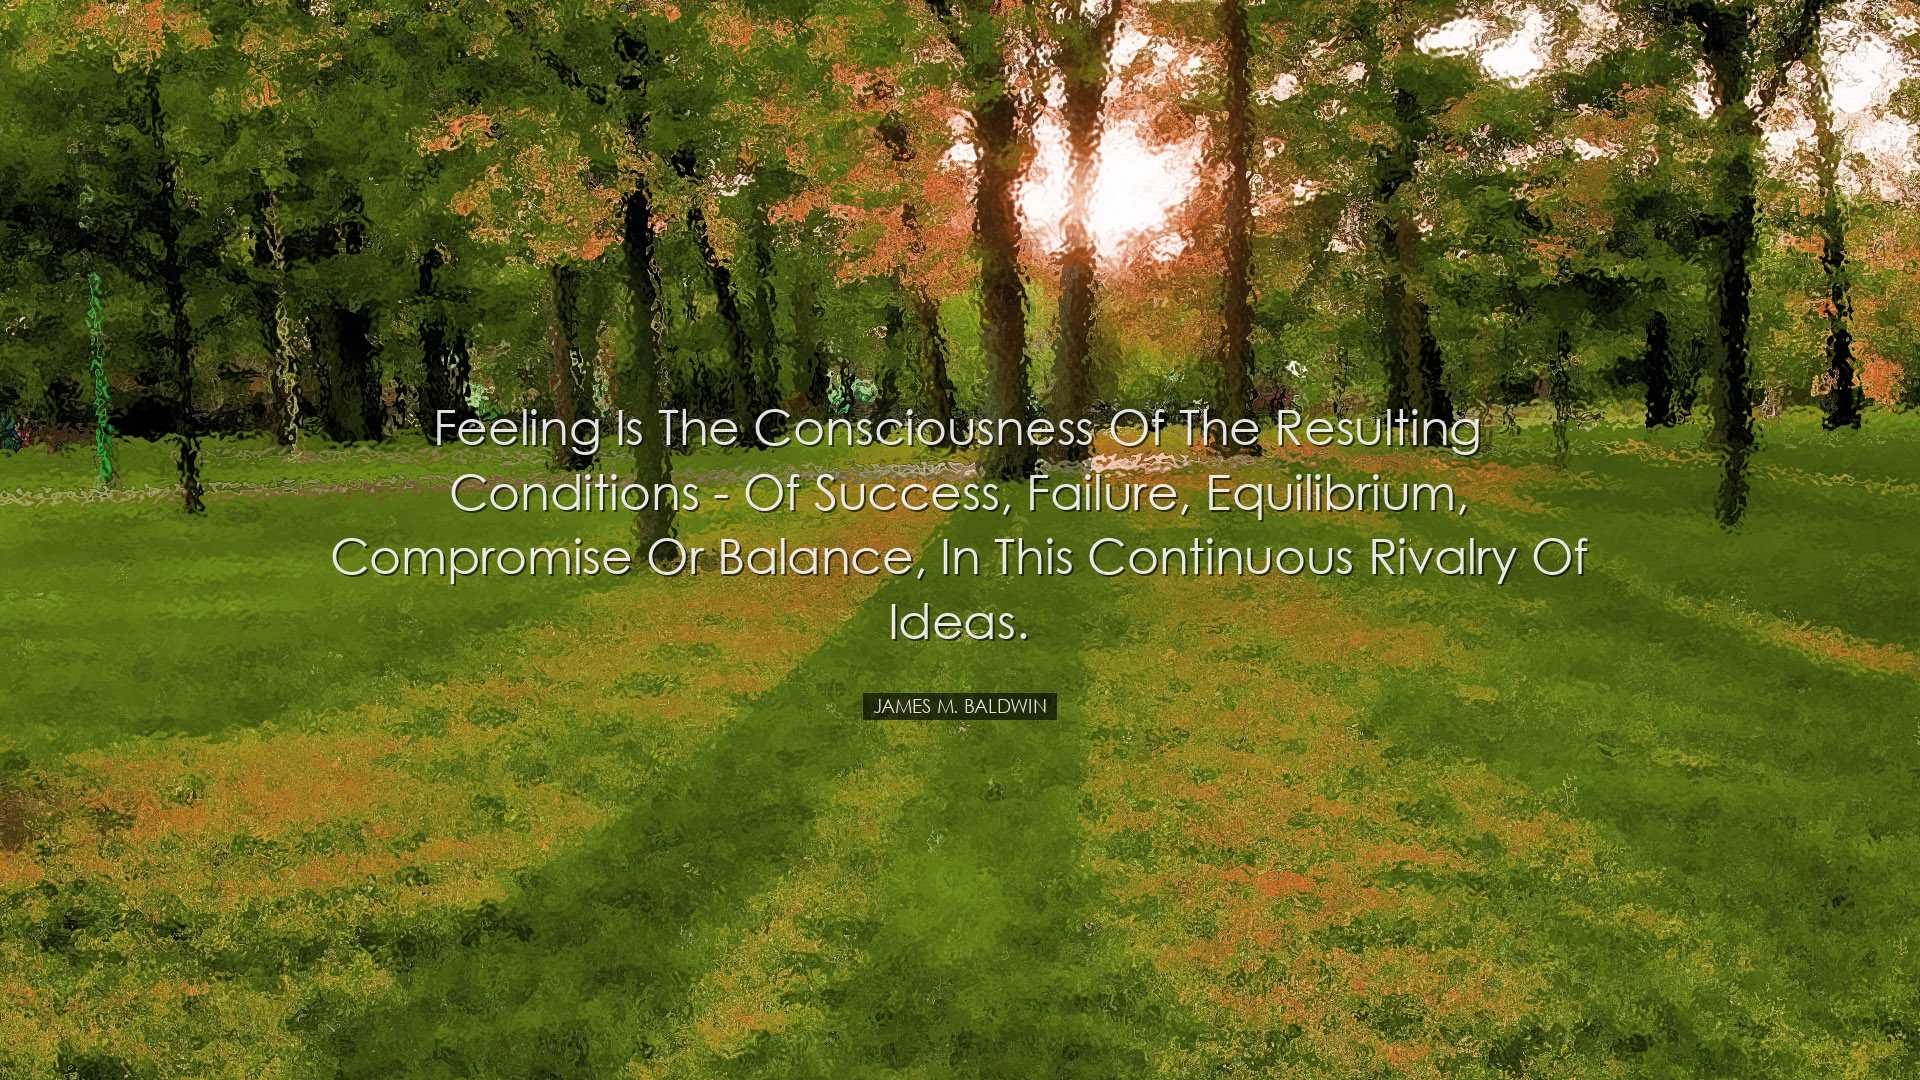 Feeling is the consciousness of the resulting conditions - of succ